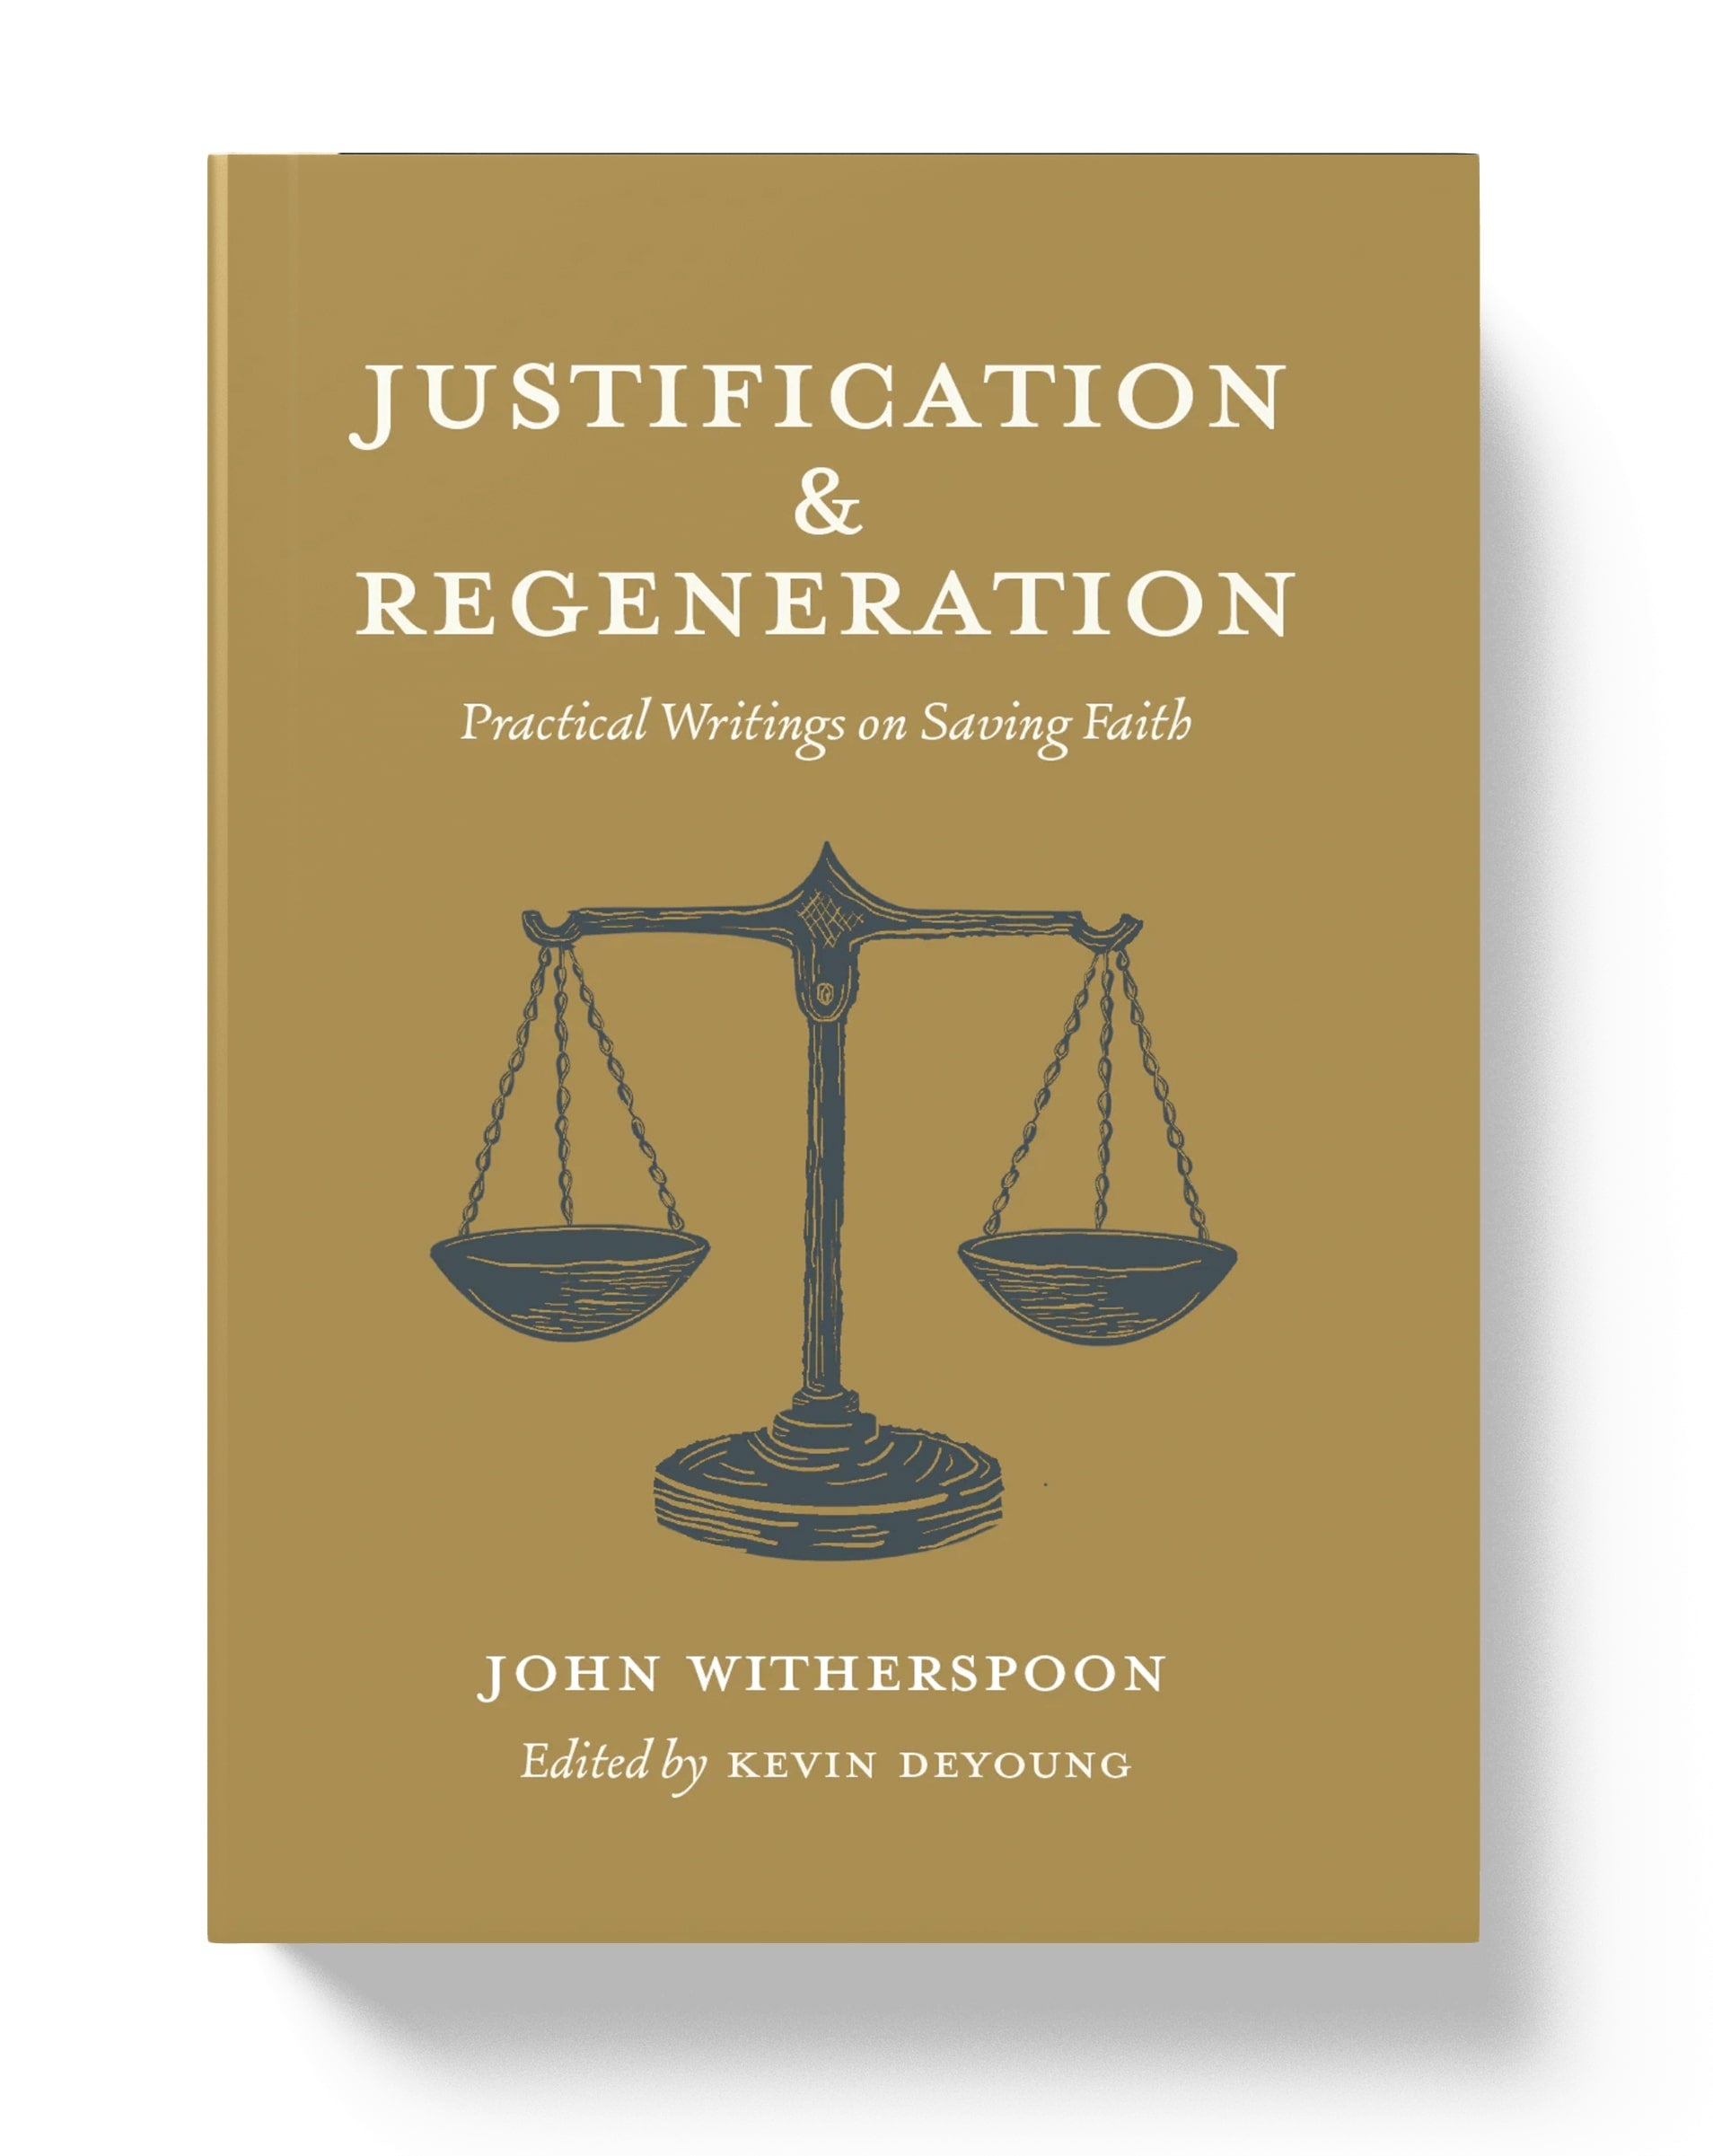 Justification and Regeneration: Practical Writings on Saving Faith